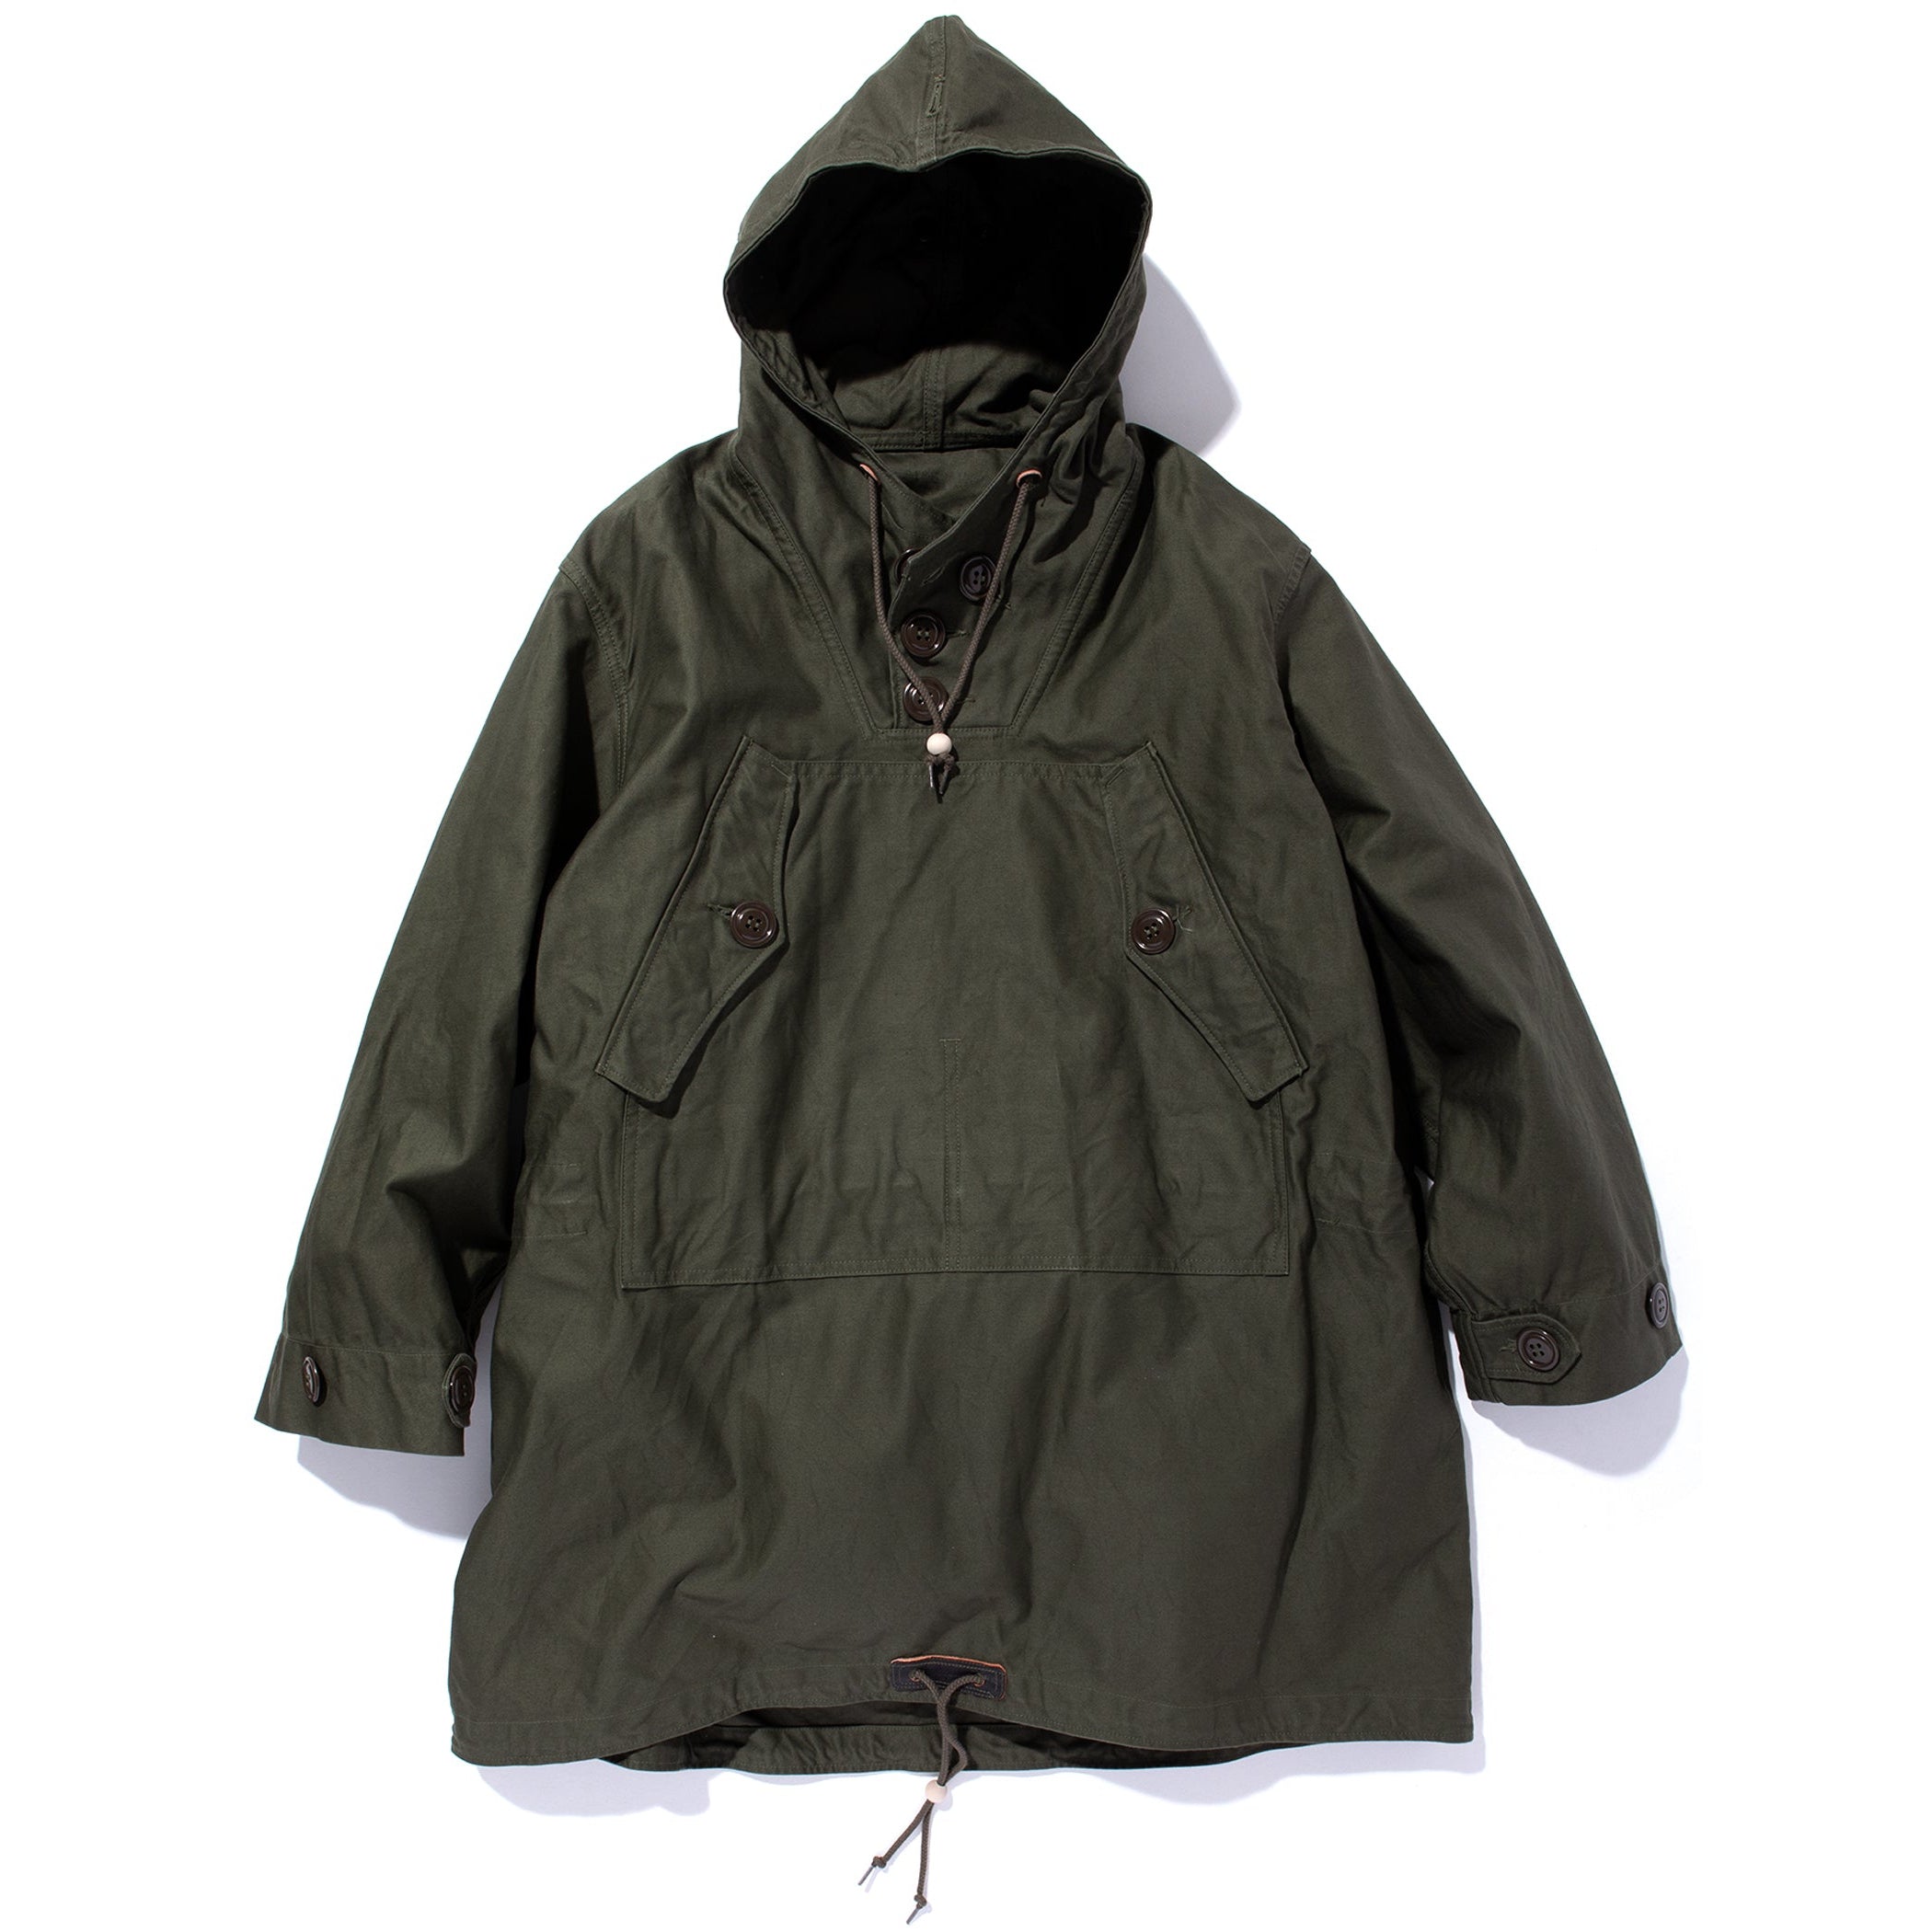 PARKA, FIELD, COTTON, OD – The Real McCoy's